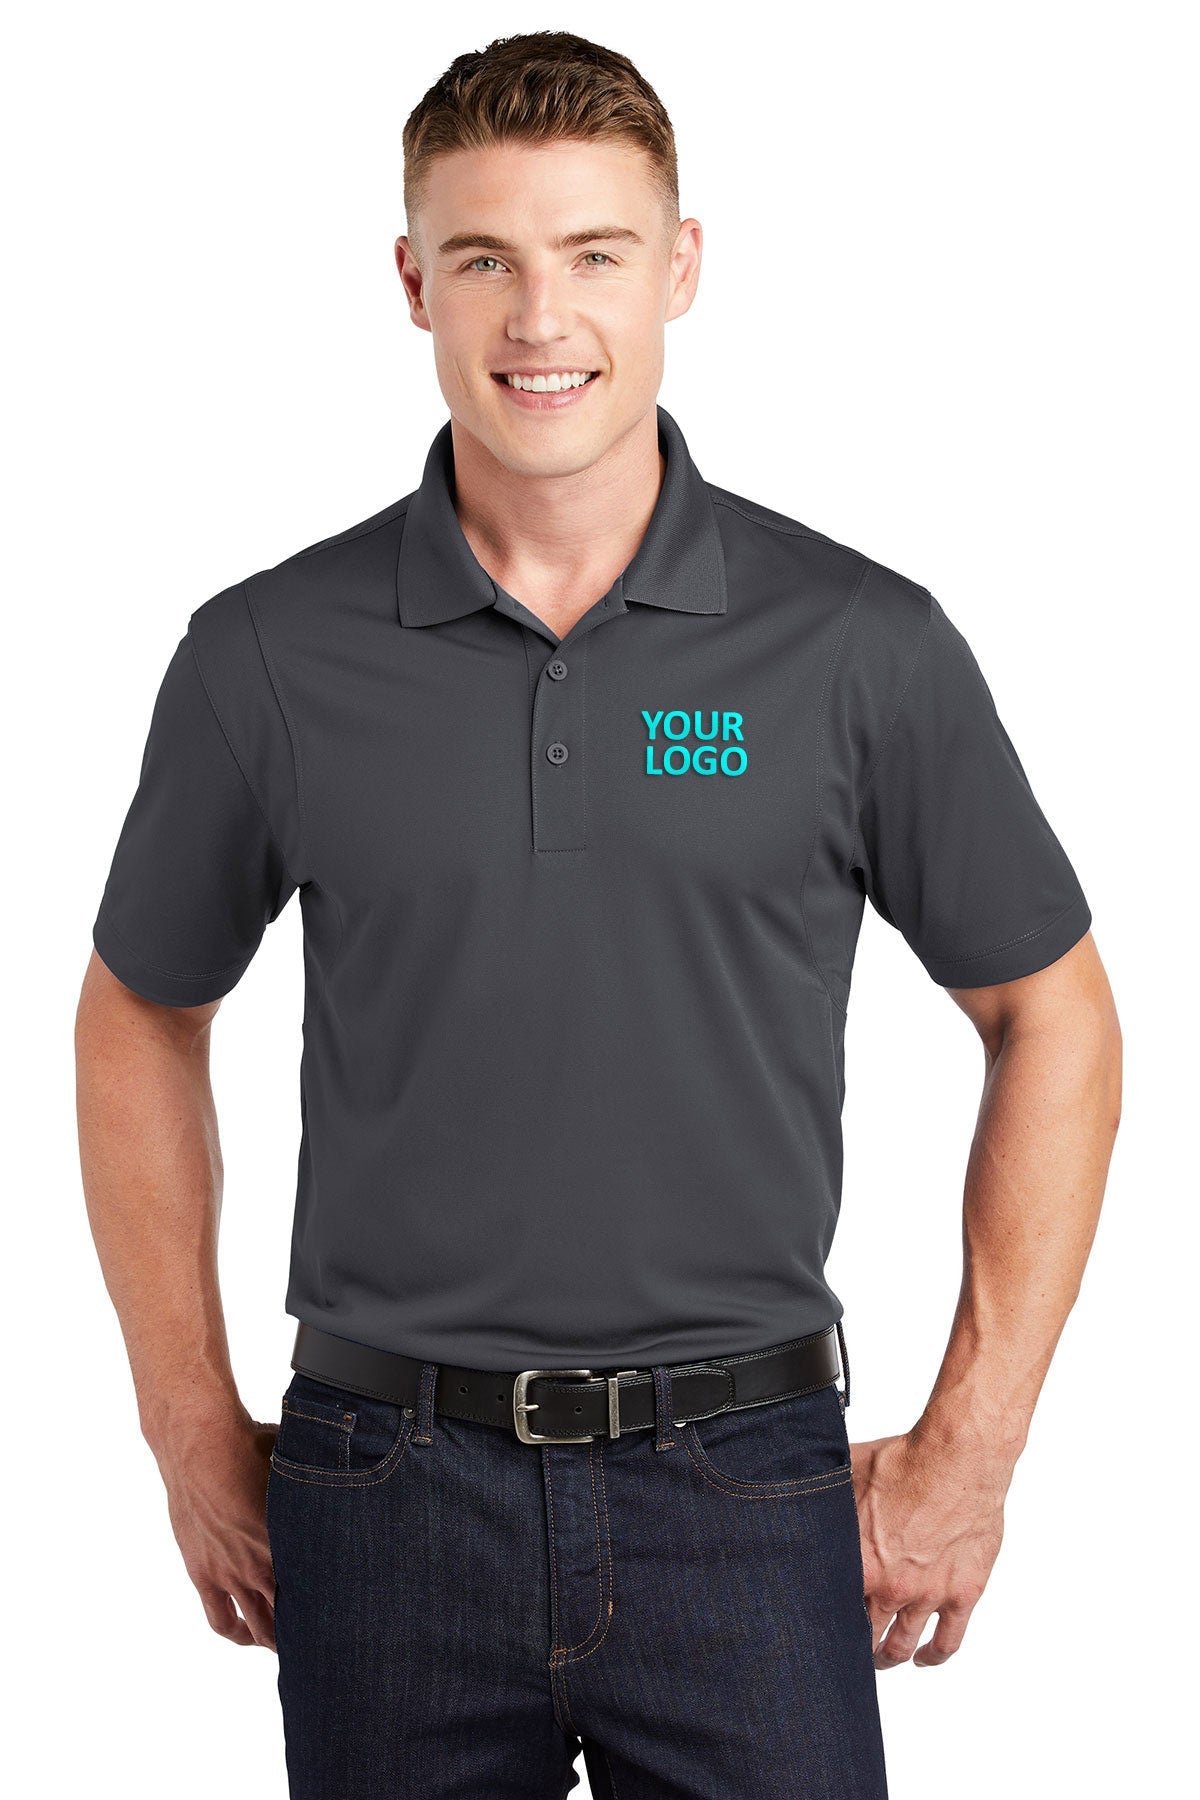 Sport-Tek Iron Grey TST650 business polo shirts embroidered